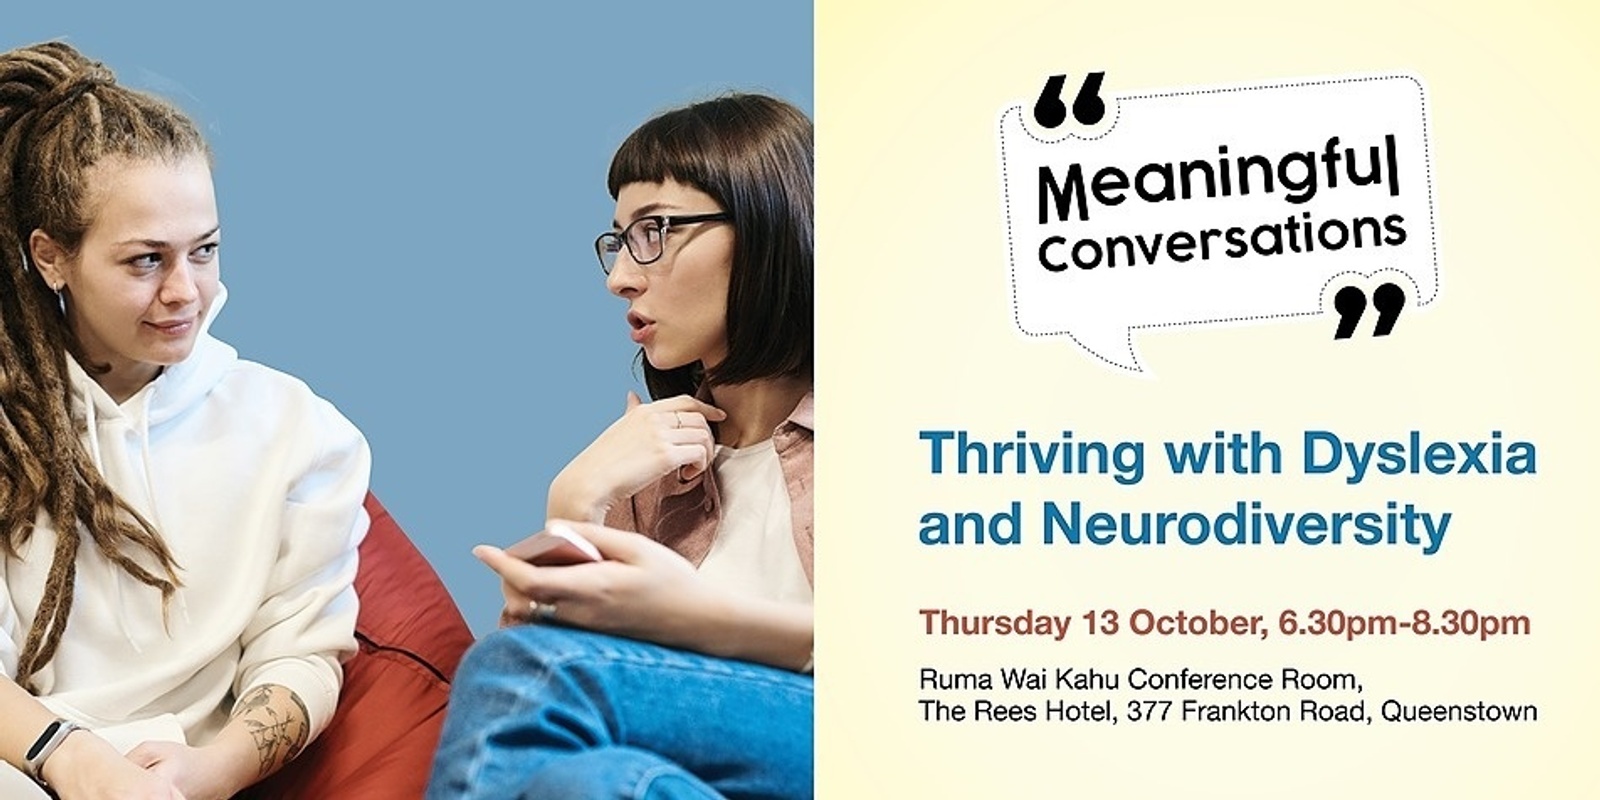 Banner image for Meaningful Conversations: Community Kōrero on Thriving with Dyslexia and Neurodiversity